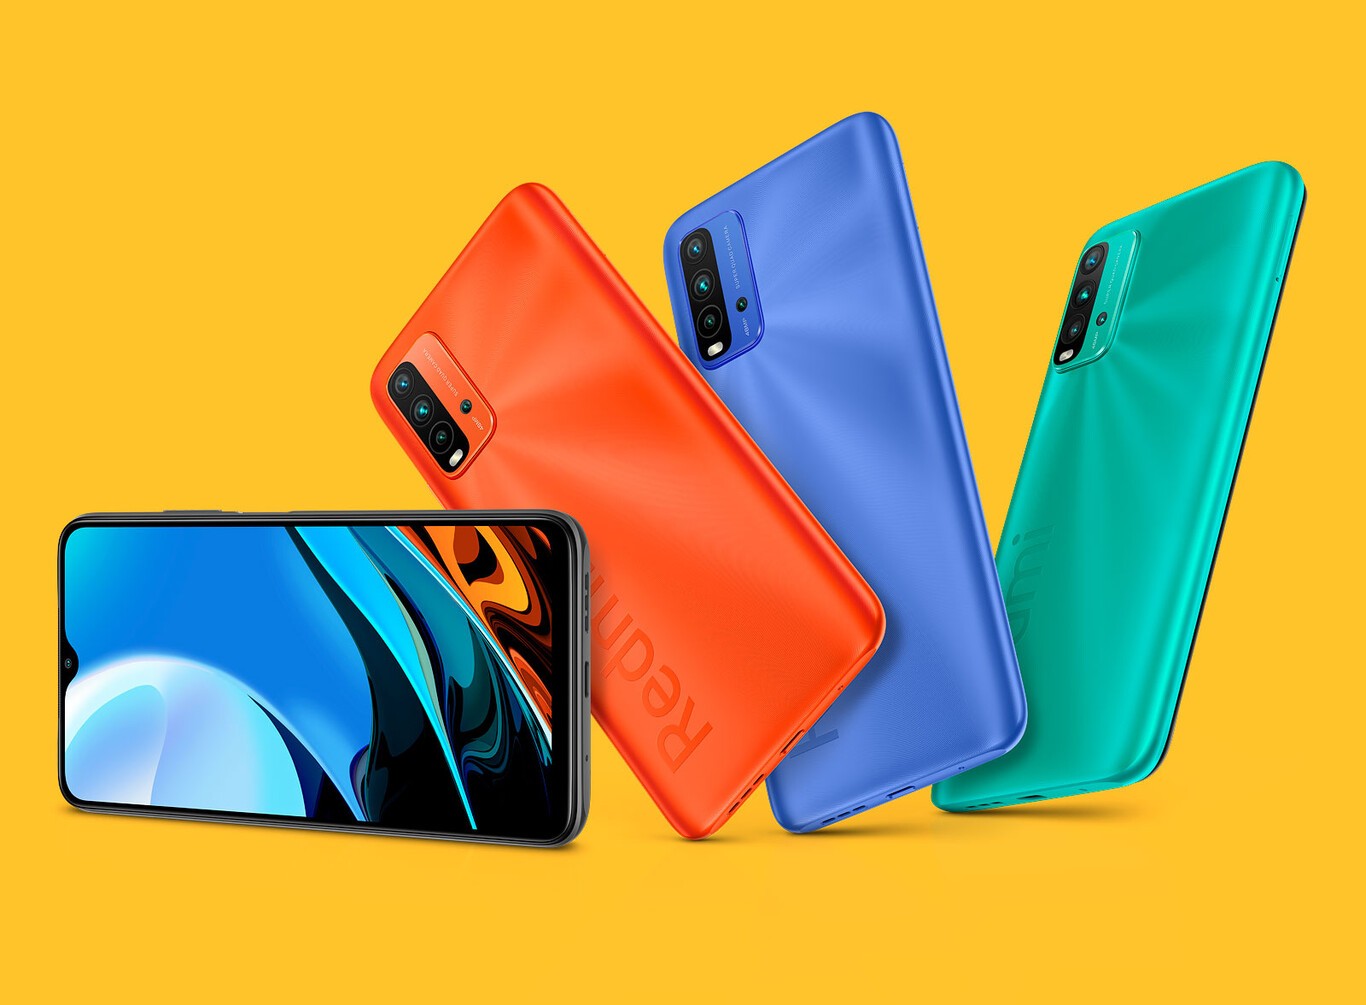 Xiaomi Redmi 9T: Features, Reviews, and Prices - Techidence